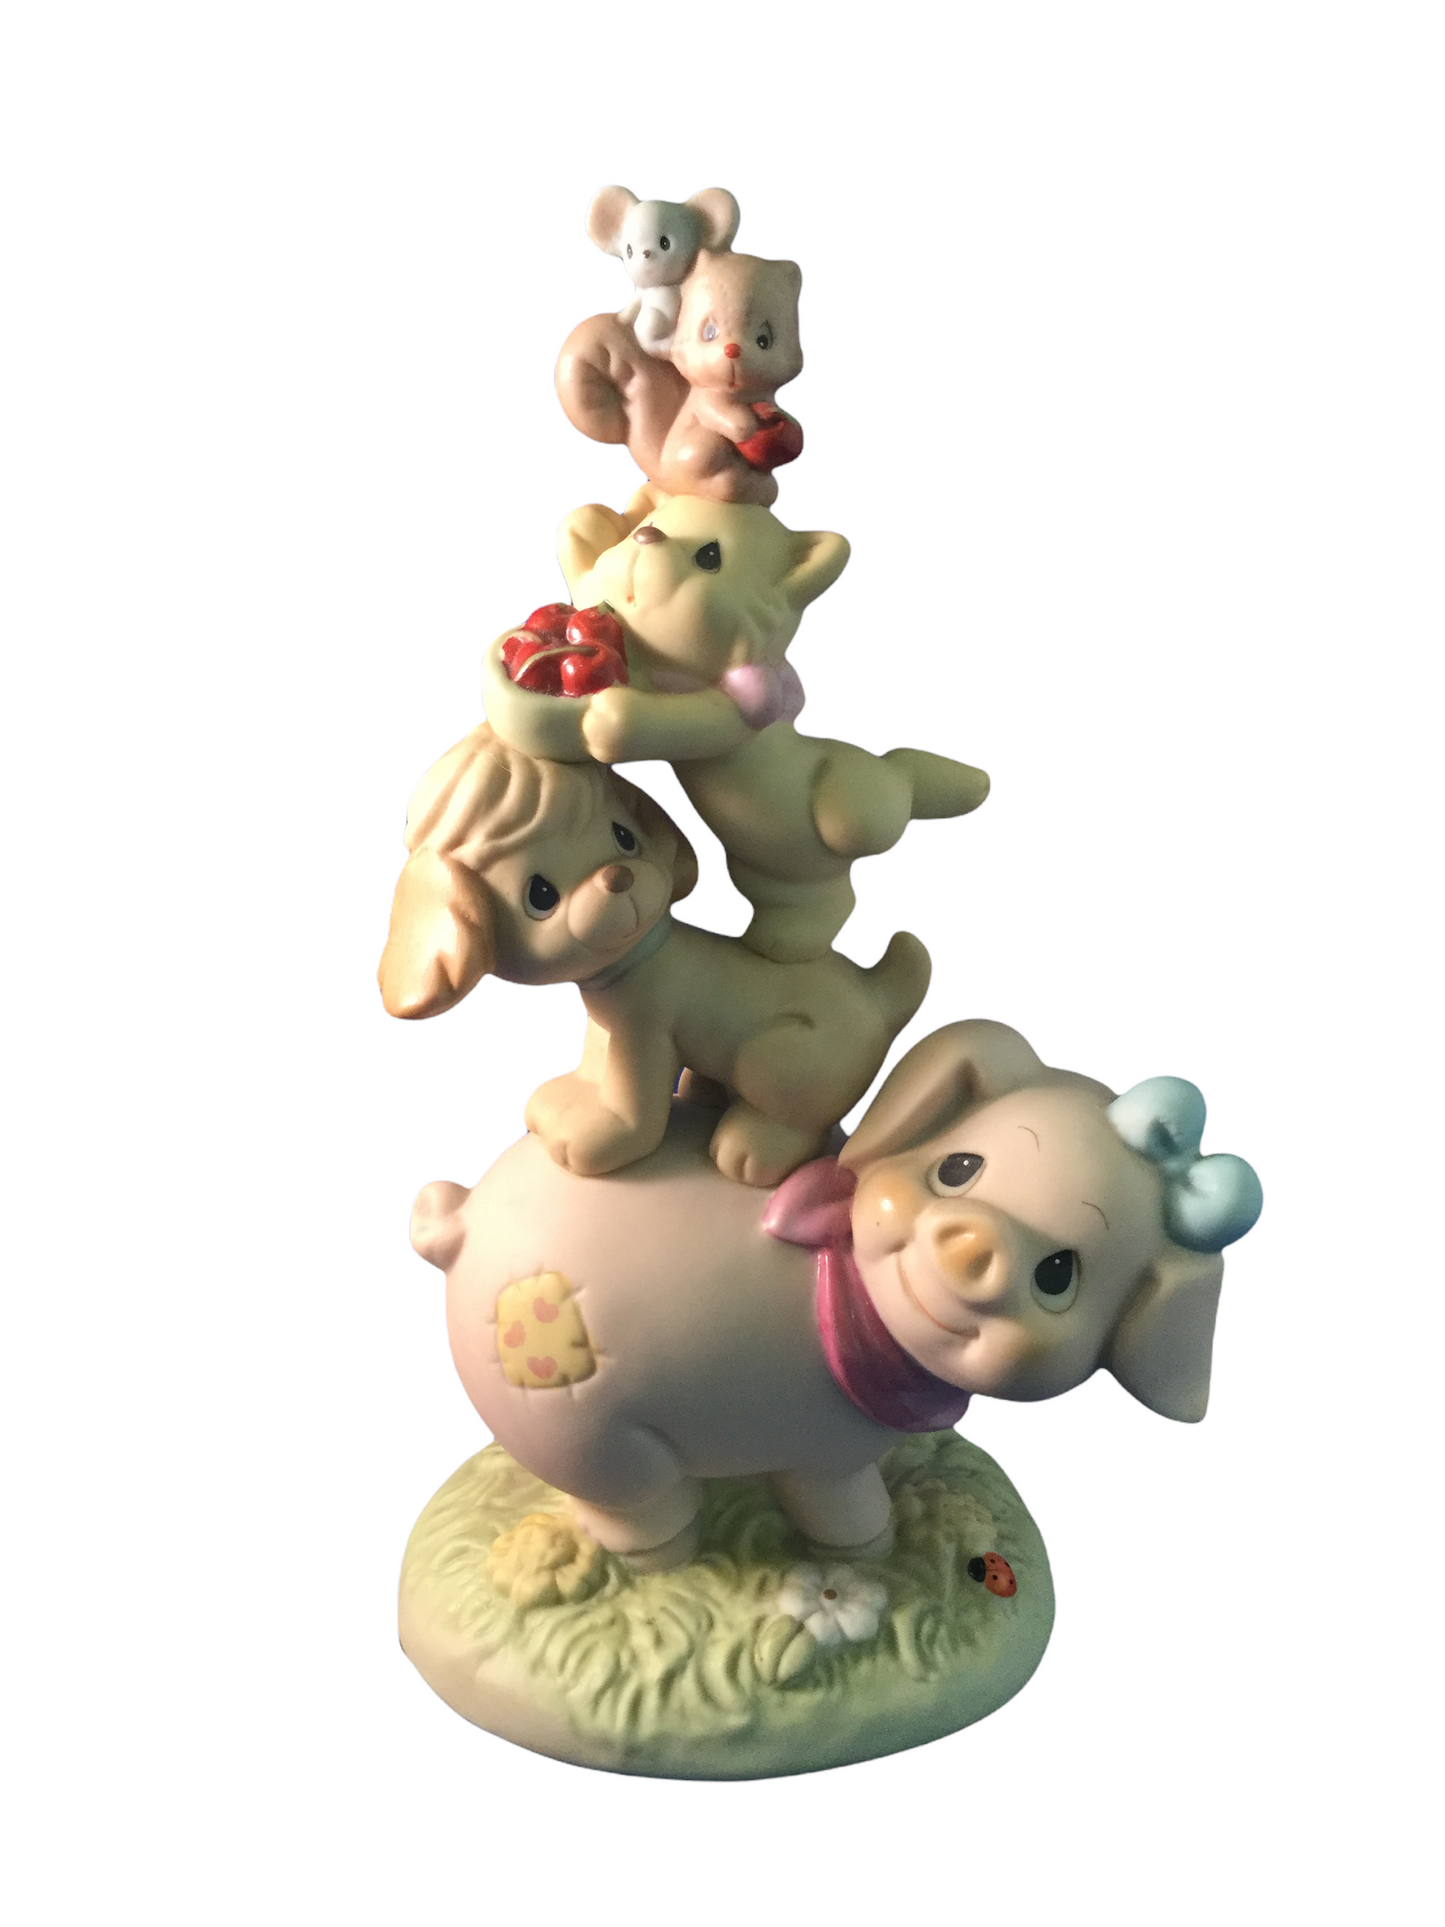 Life Would Be The Pits Without Friends - Precious Moment Figurine